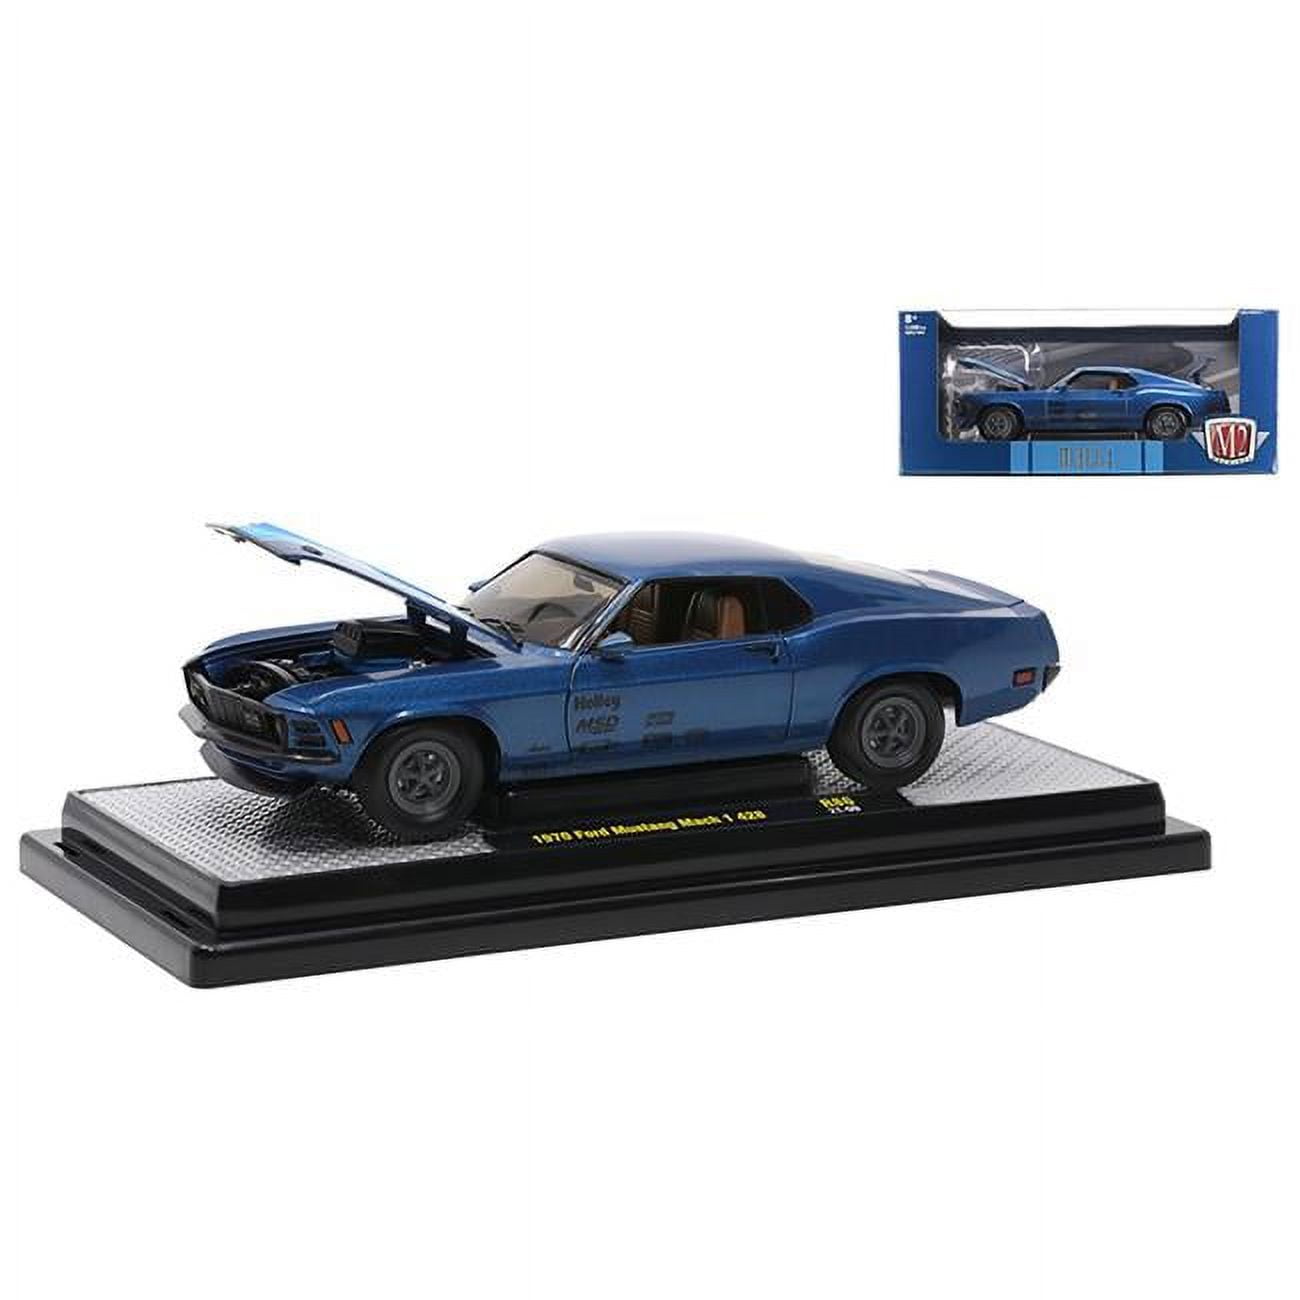 M2M40300-86A 428 in. 1 by 24 Scale Unisex Mach 1 Diecast Model Car for 1970 Ford Mustang , Blue -  M2 Machines